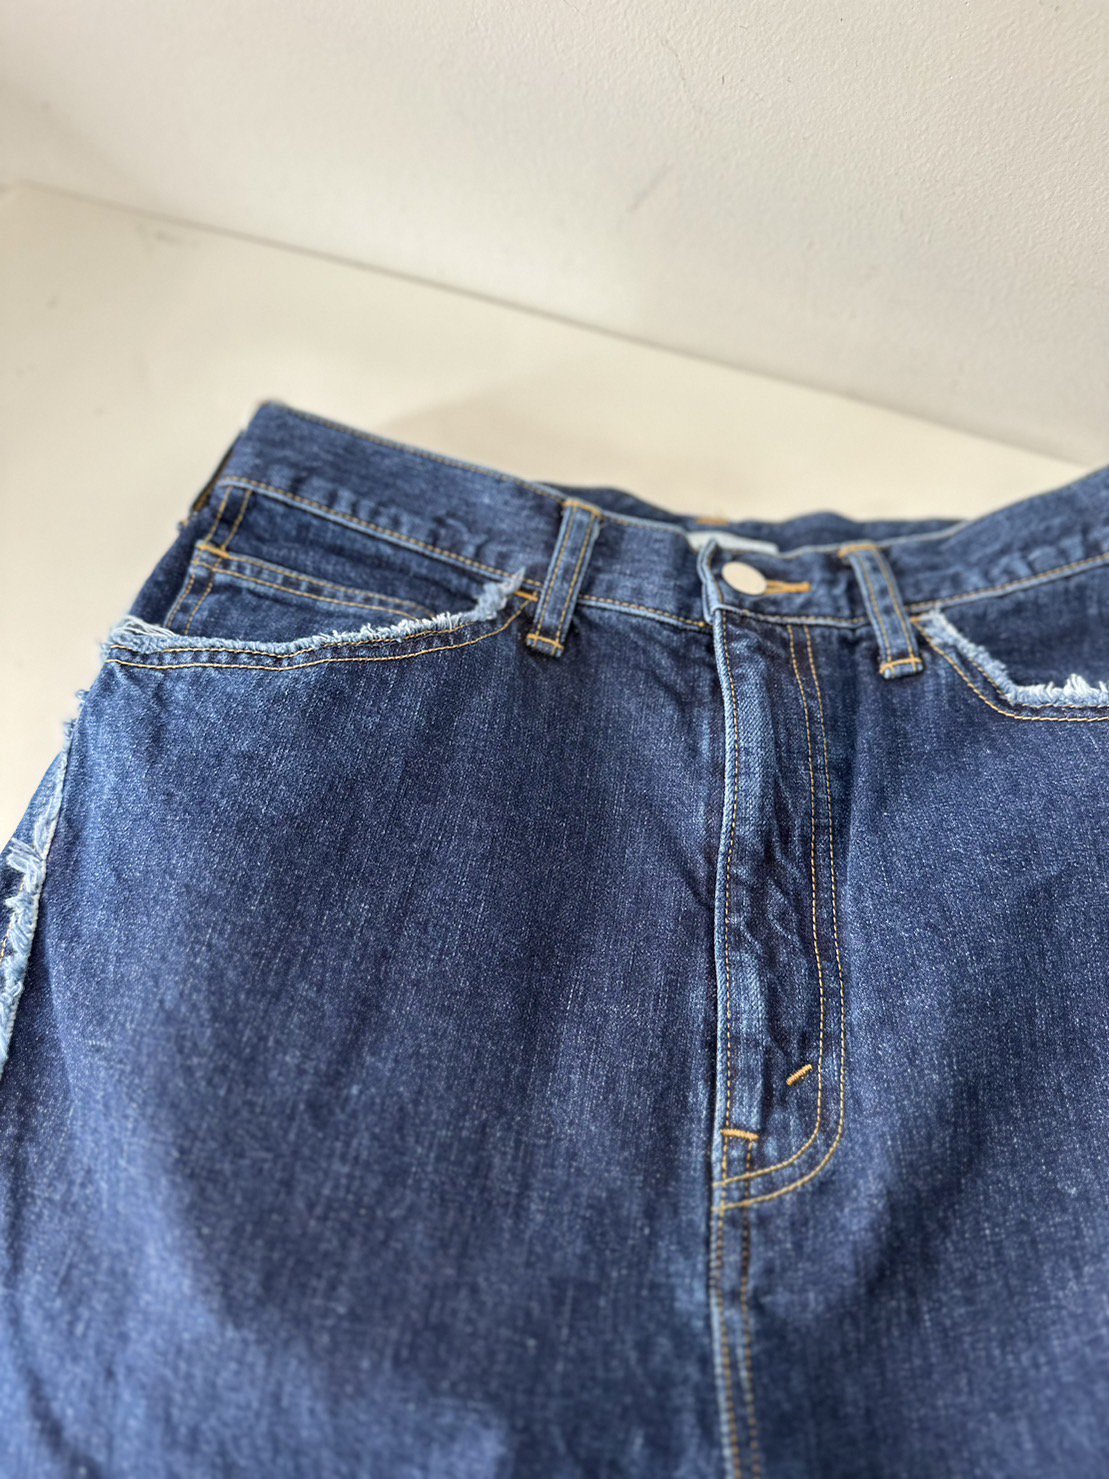 JieDa<br />USED LOOSE FIT JEANS / INDOGO<img class='new_mark_img2' src='https://img.shop-pro.jp/img/new/icons47.gif' style='border:none;display:inline;margin:0px;padding:0px;width:auto;' />